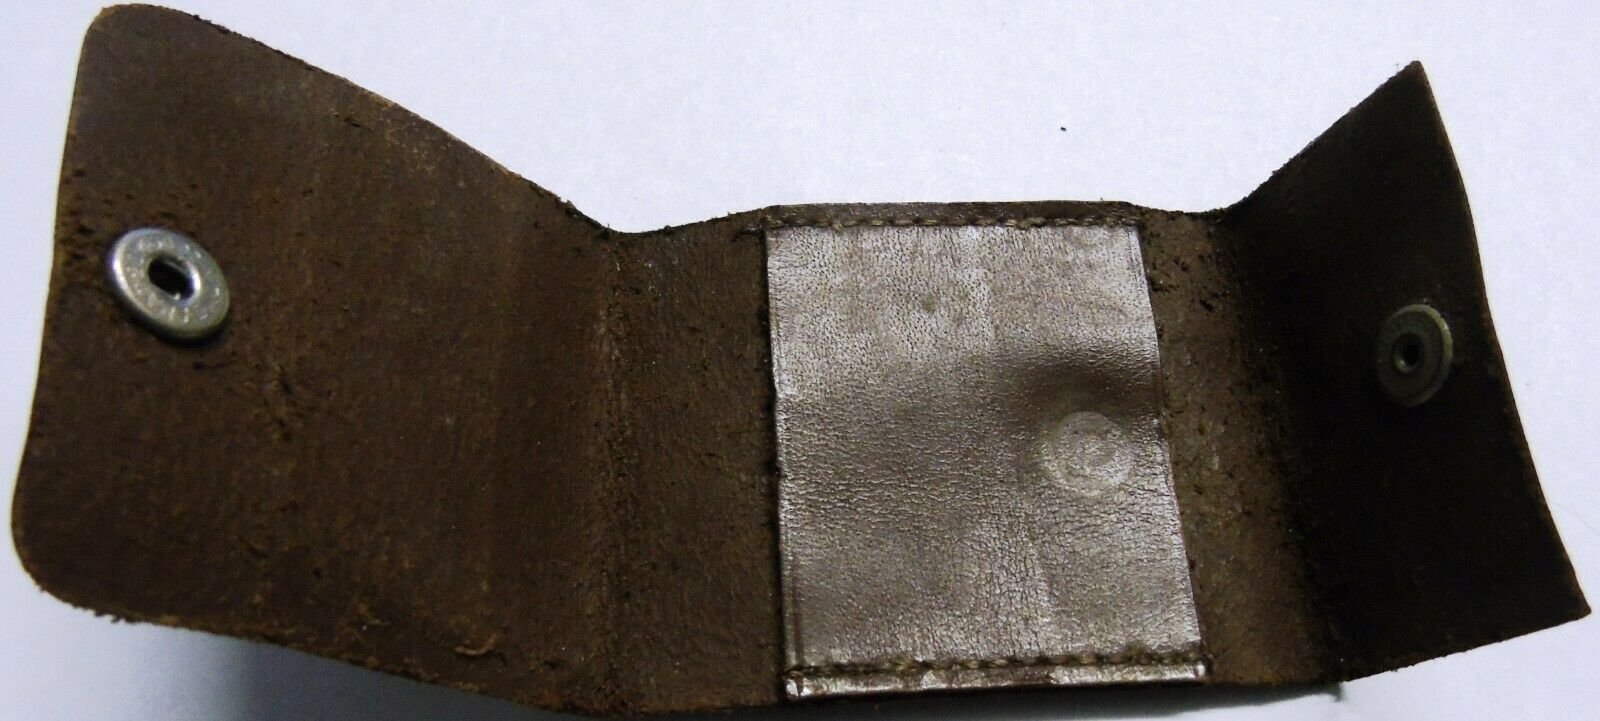 Interior of WW2 Brown Leather ARP Match Book Cover